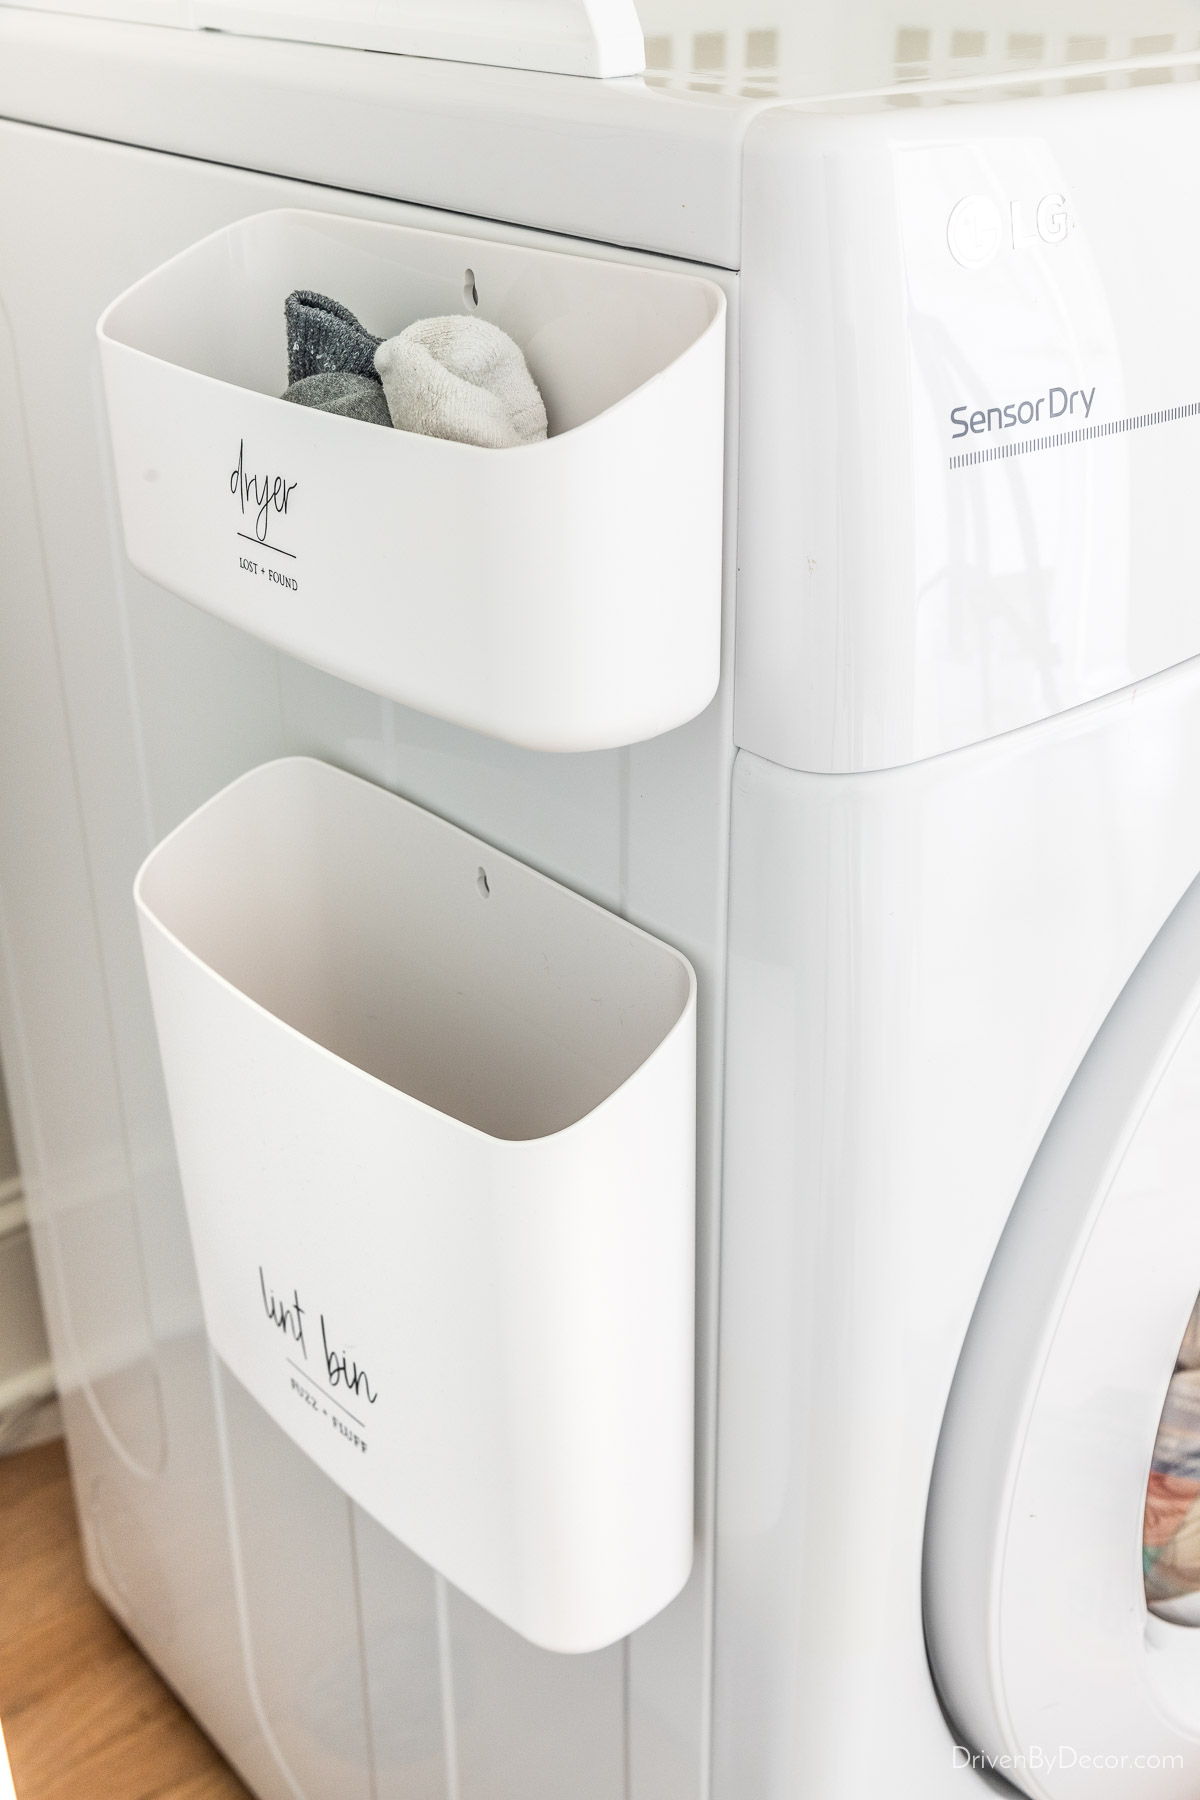 Magnetic bins for lint and unpaired socks on side of dryer